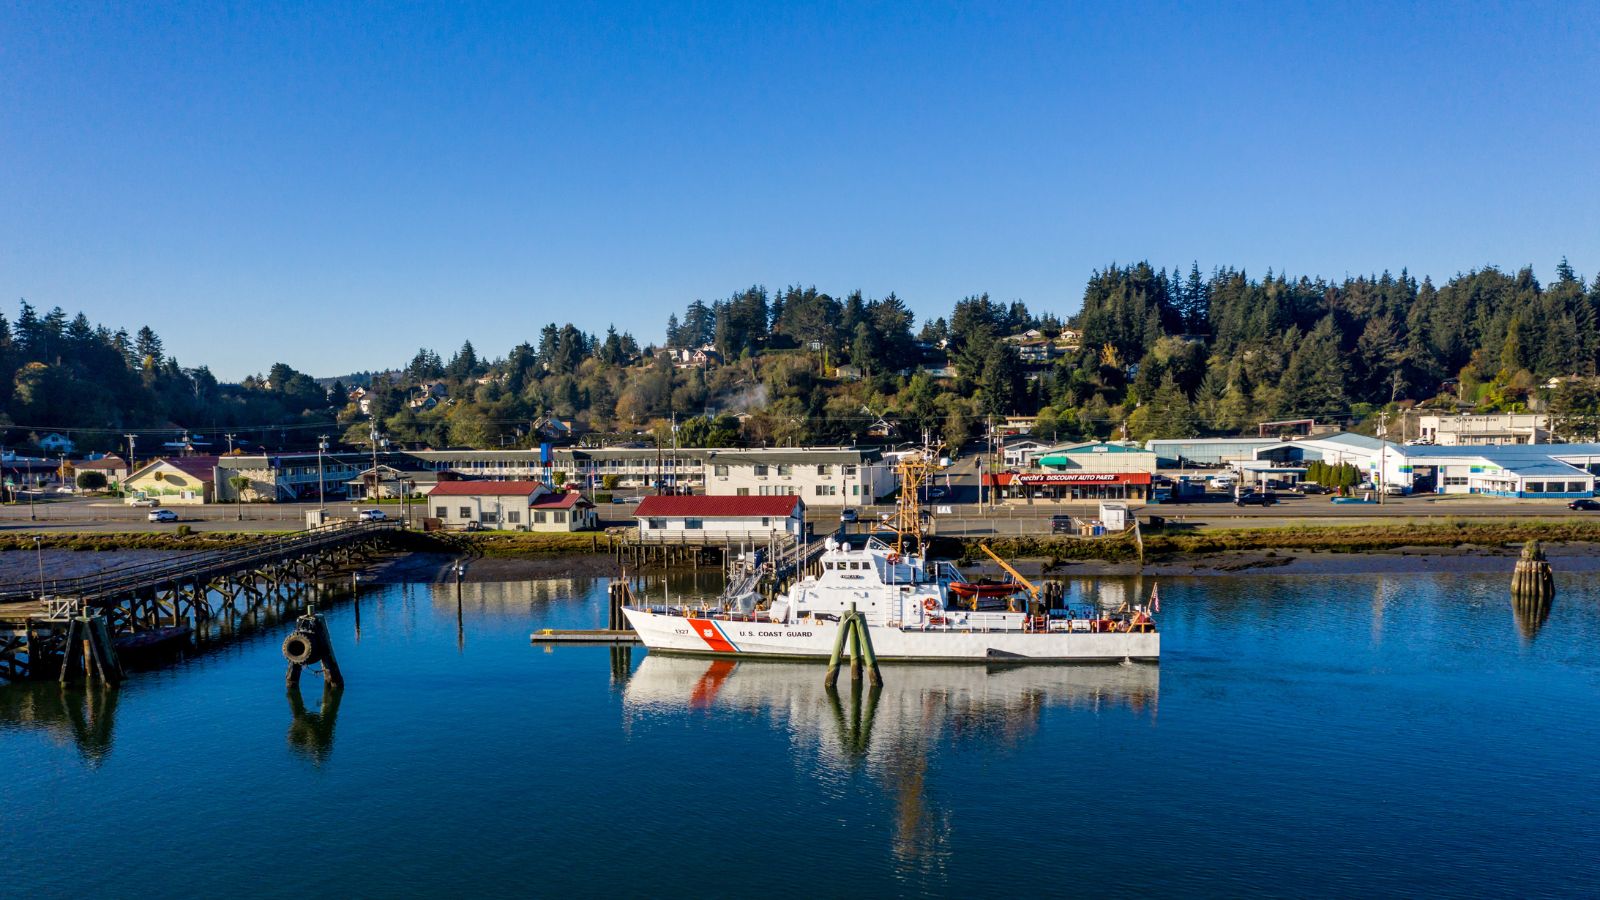 <p>Coos Bay has a stunning coastal landscape and is close to the naturally beautiful Oregon Dunes. It also provides affordable living, which is vastly different compared to other towns and cities in the state. There are plenty of outdoor activities to keep you entertained during retirement in Coos Bay. </p>